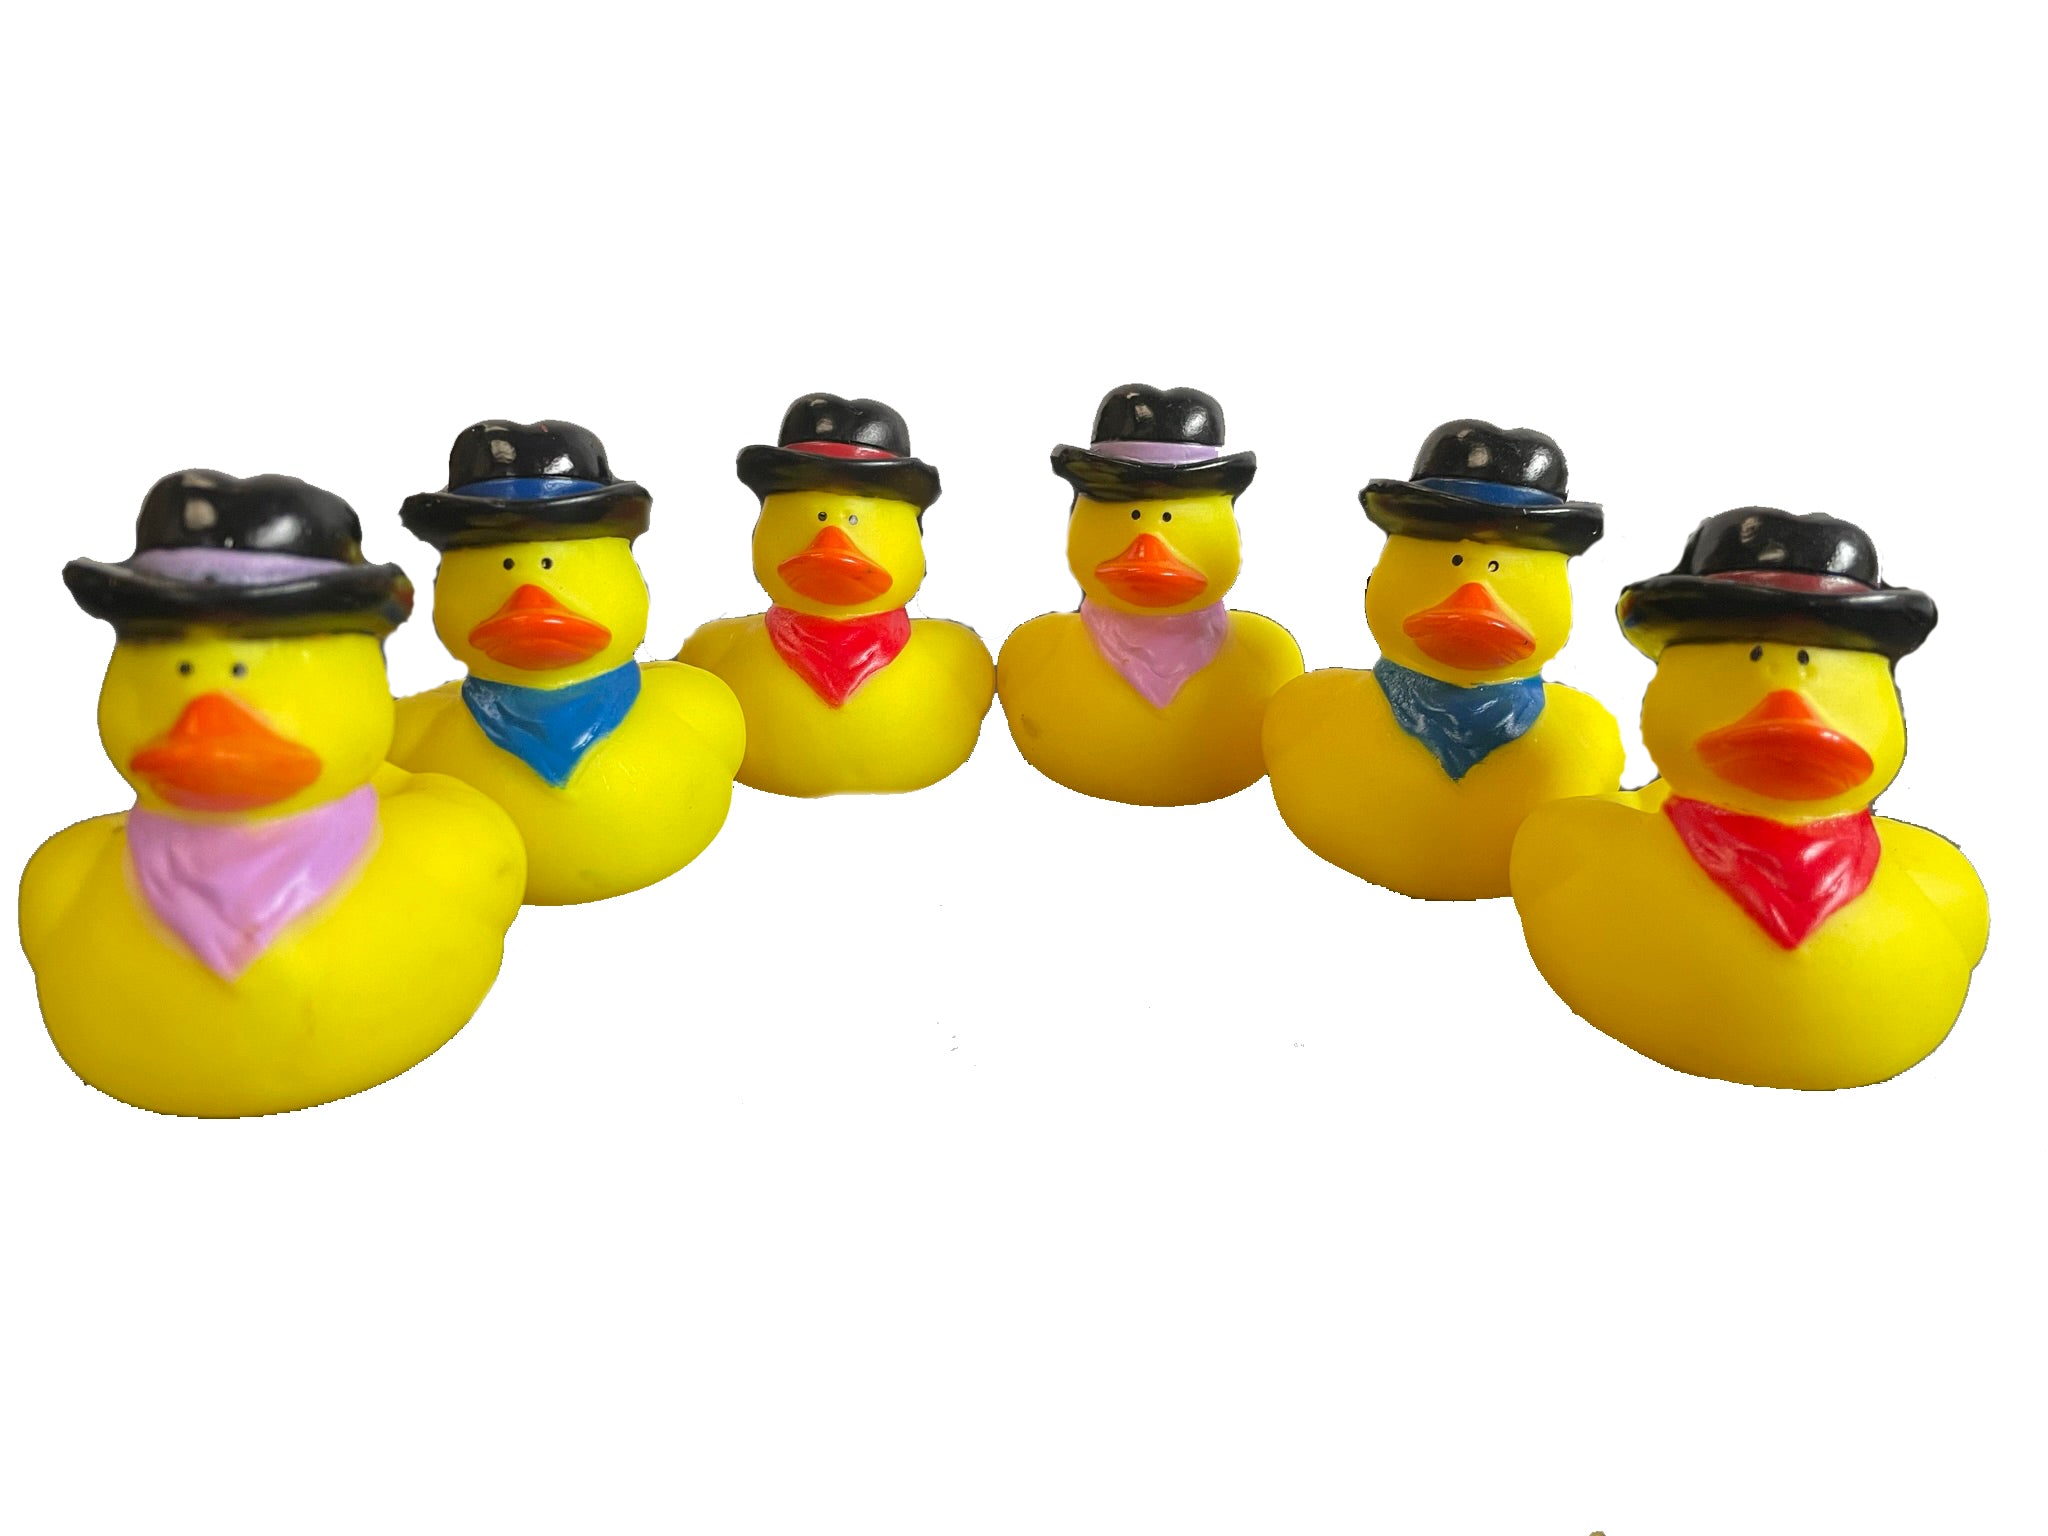 Cowboy Rubber Ducky Toy